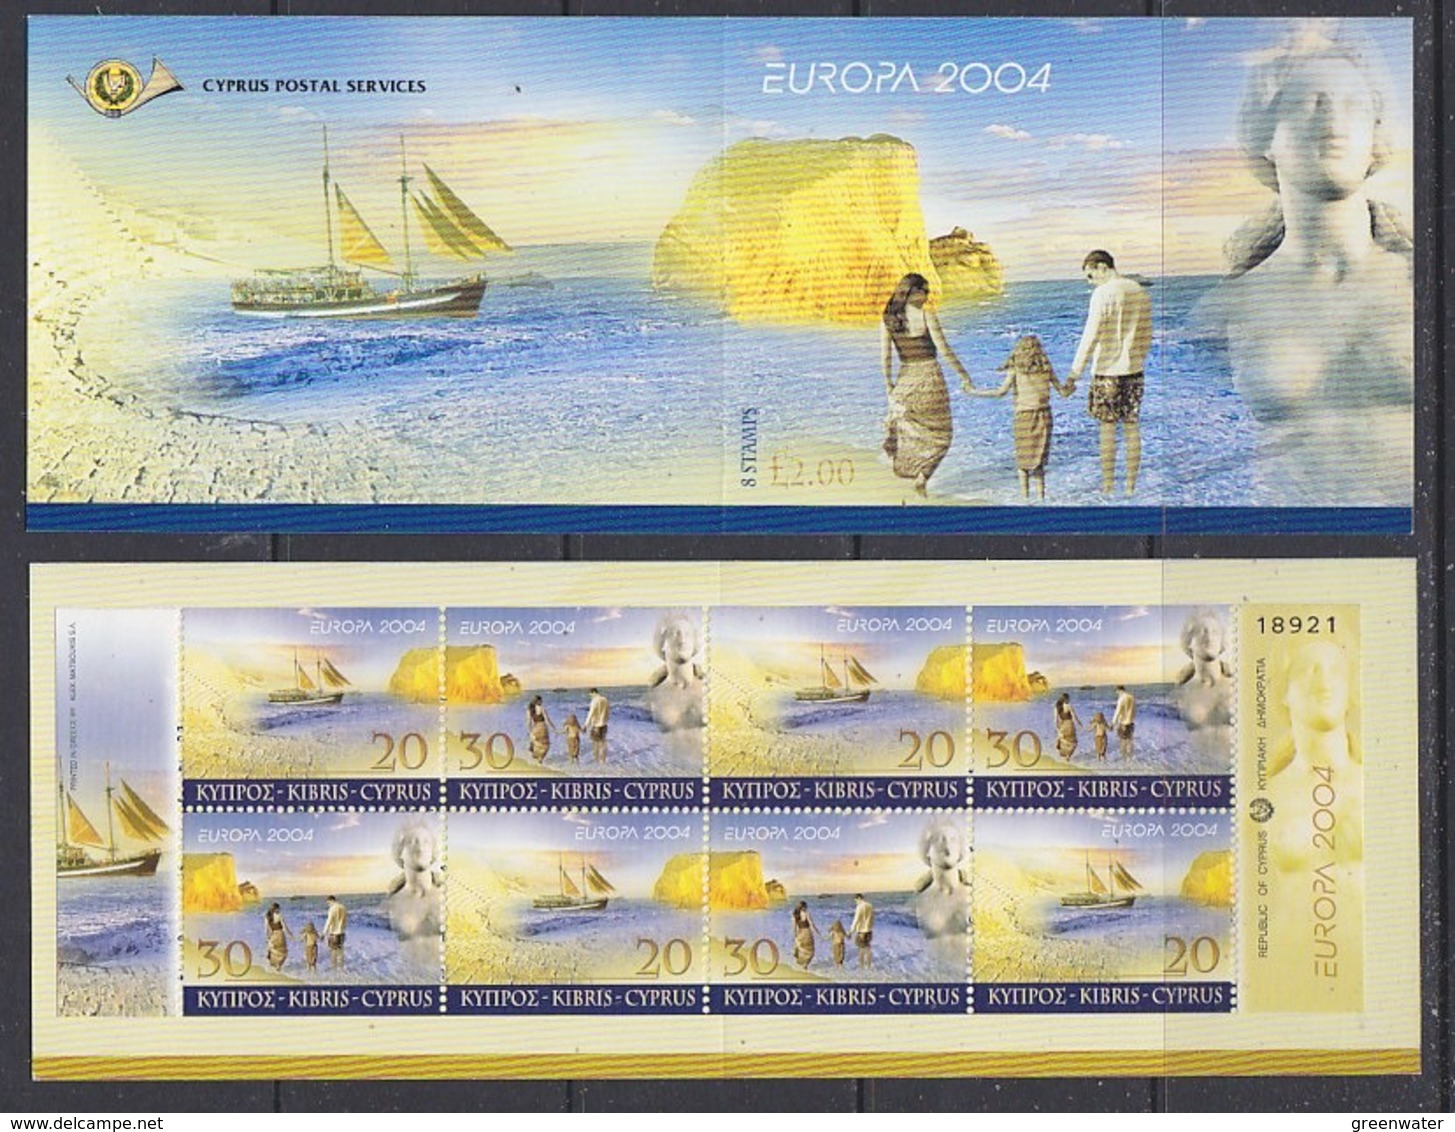 Europa Cept 2004 Cyprus  Booklet  ** Mnh (44708) - 2004